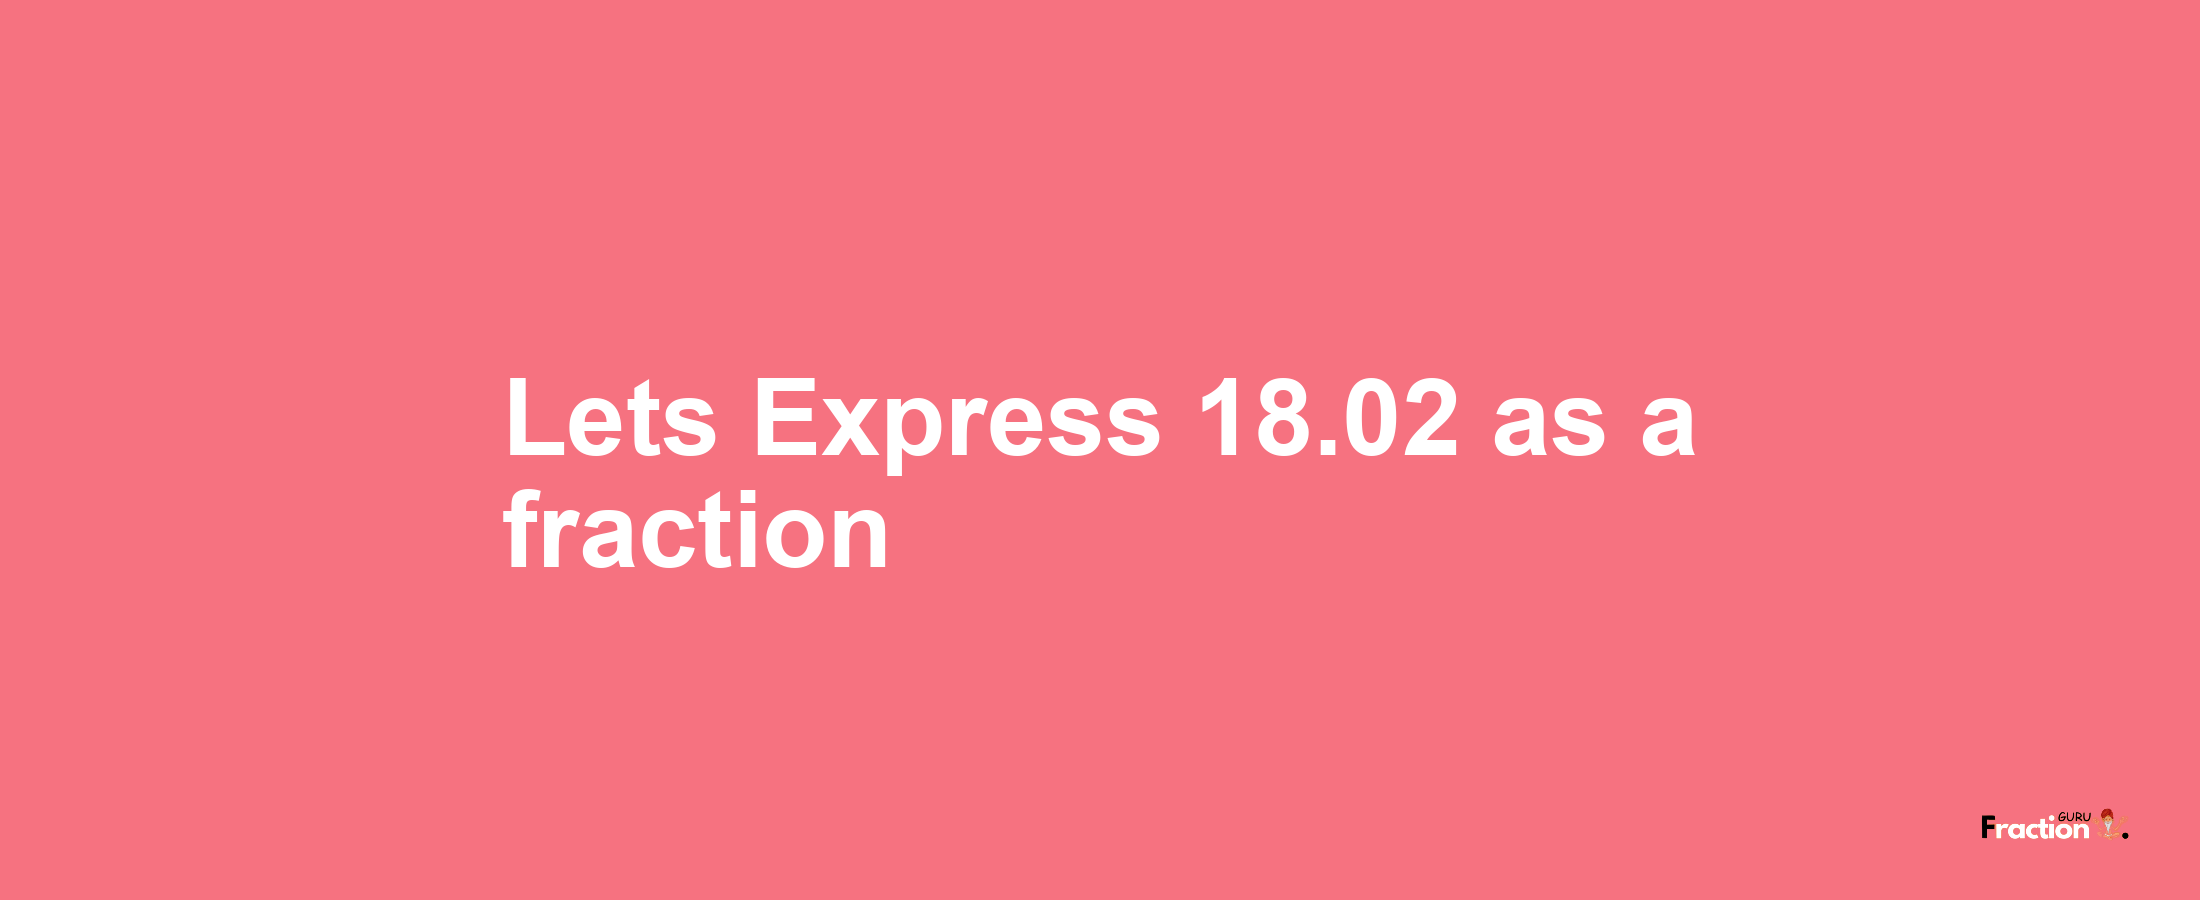 Lets Express 18.02 as afraction